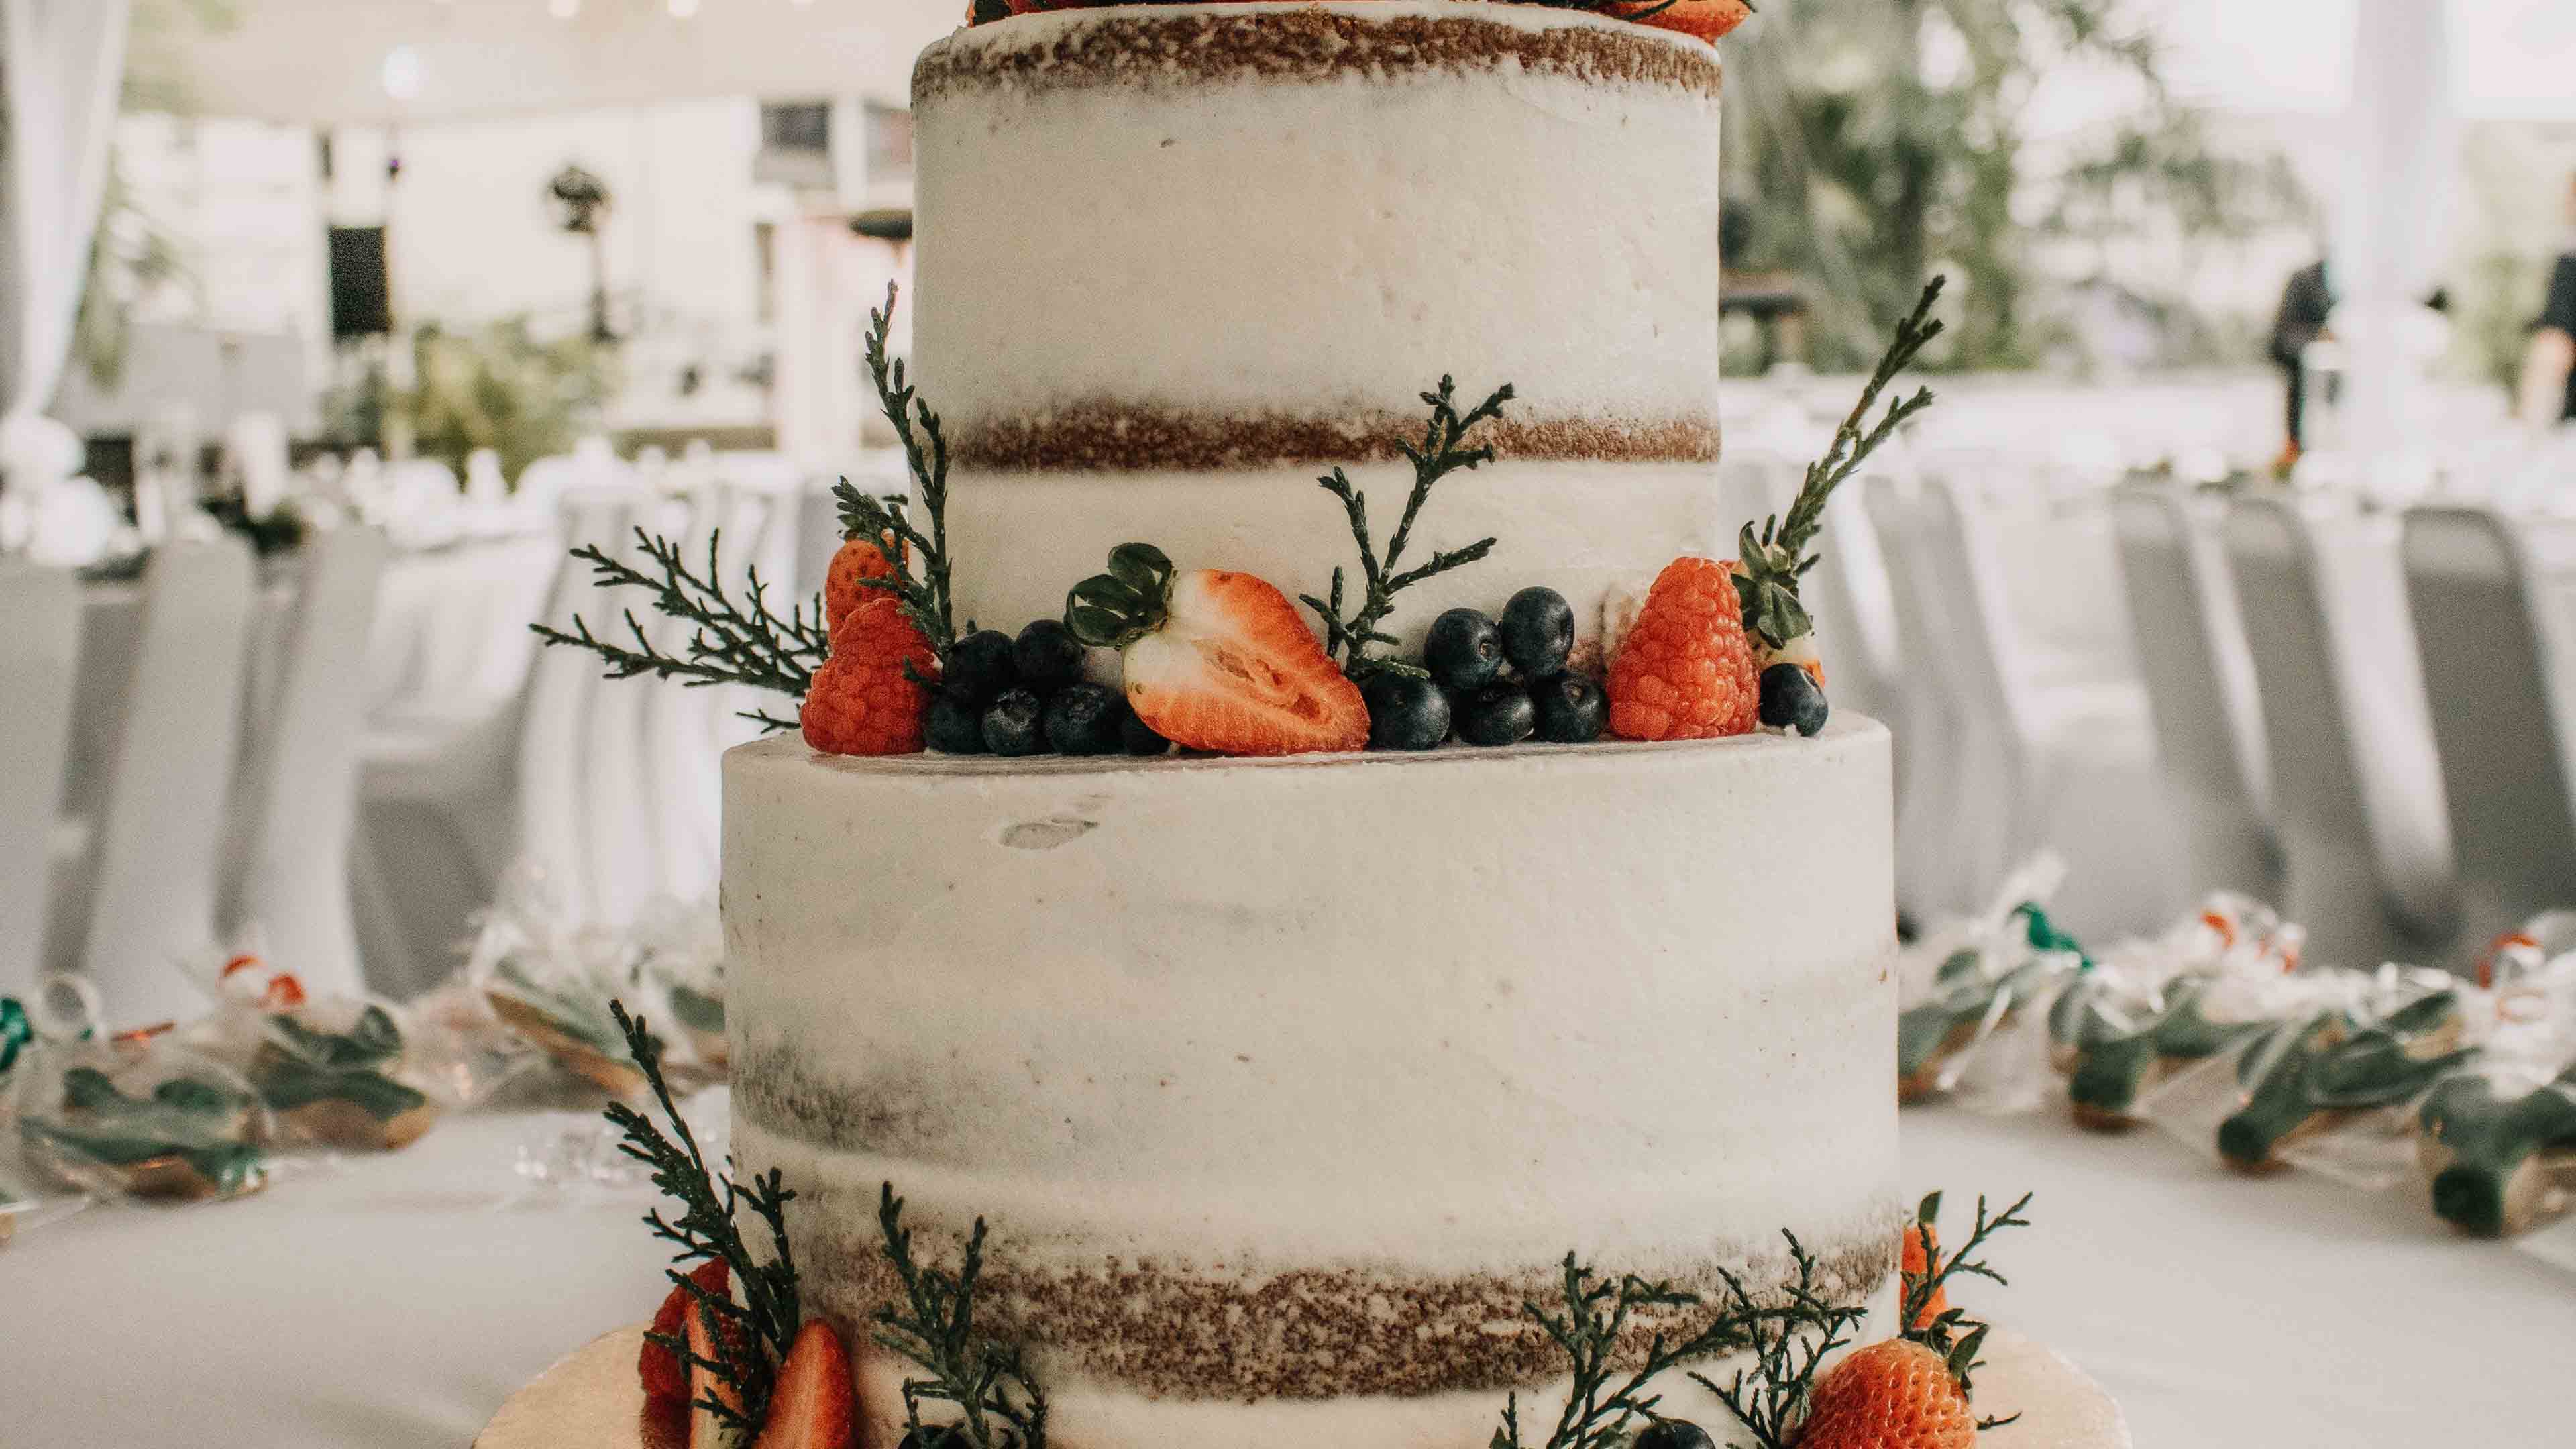 Wedding Cakes , HD Wallpaper & Backgrounds